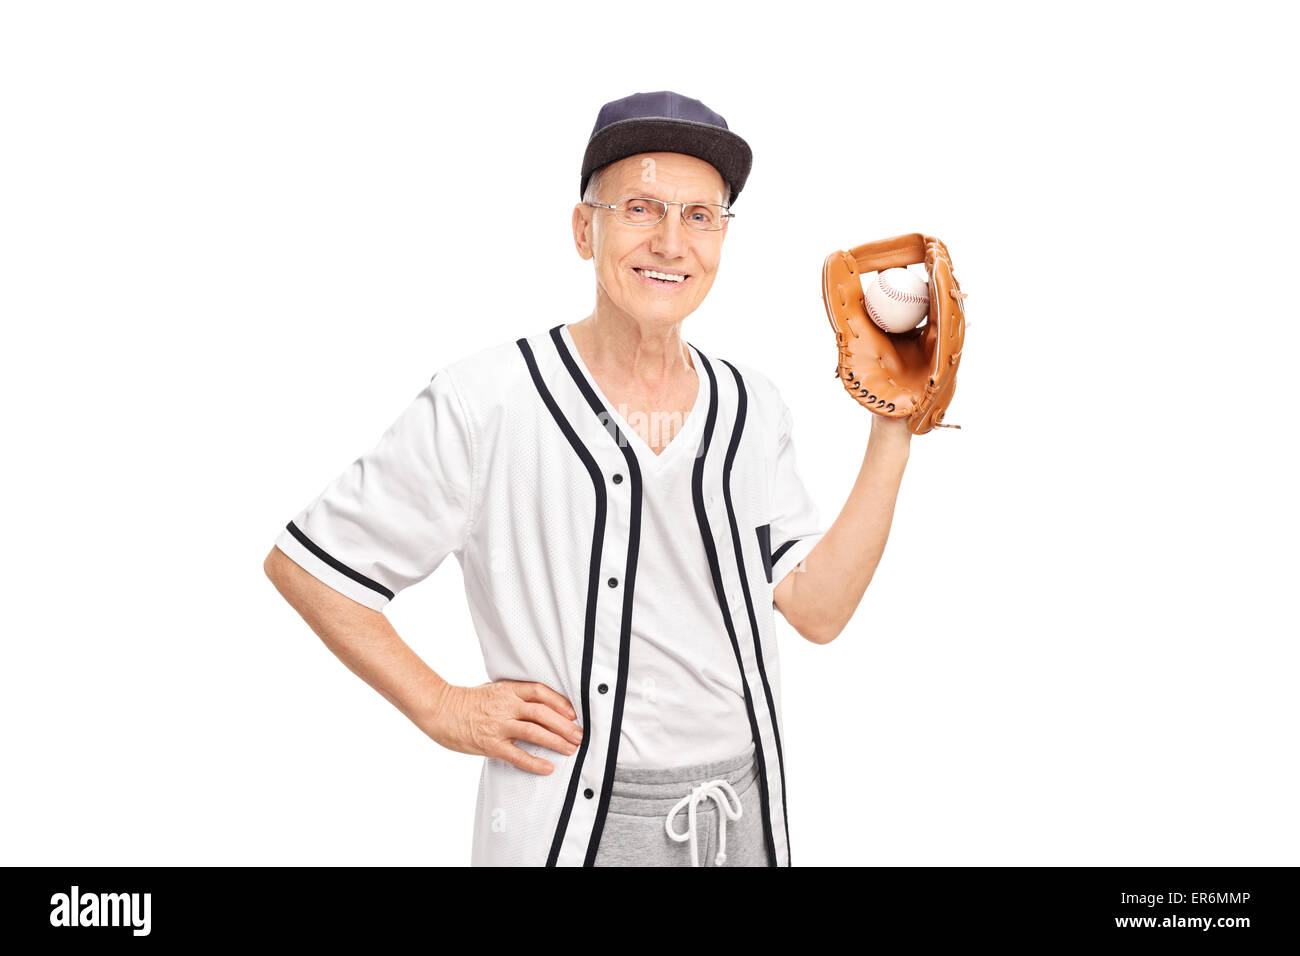 Senior man in a white baseball jersey holding a baseball and looking at the camera isolated on white background Stock Photo